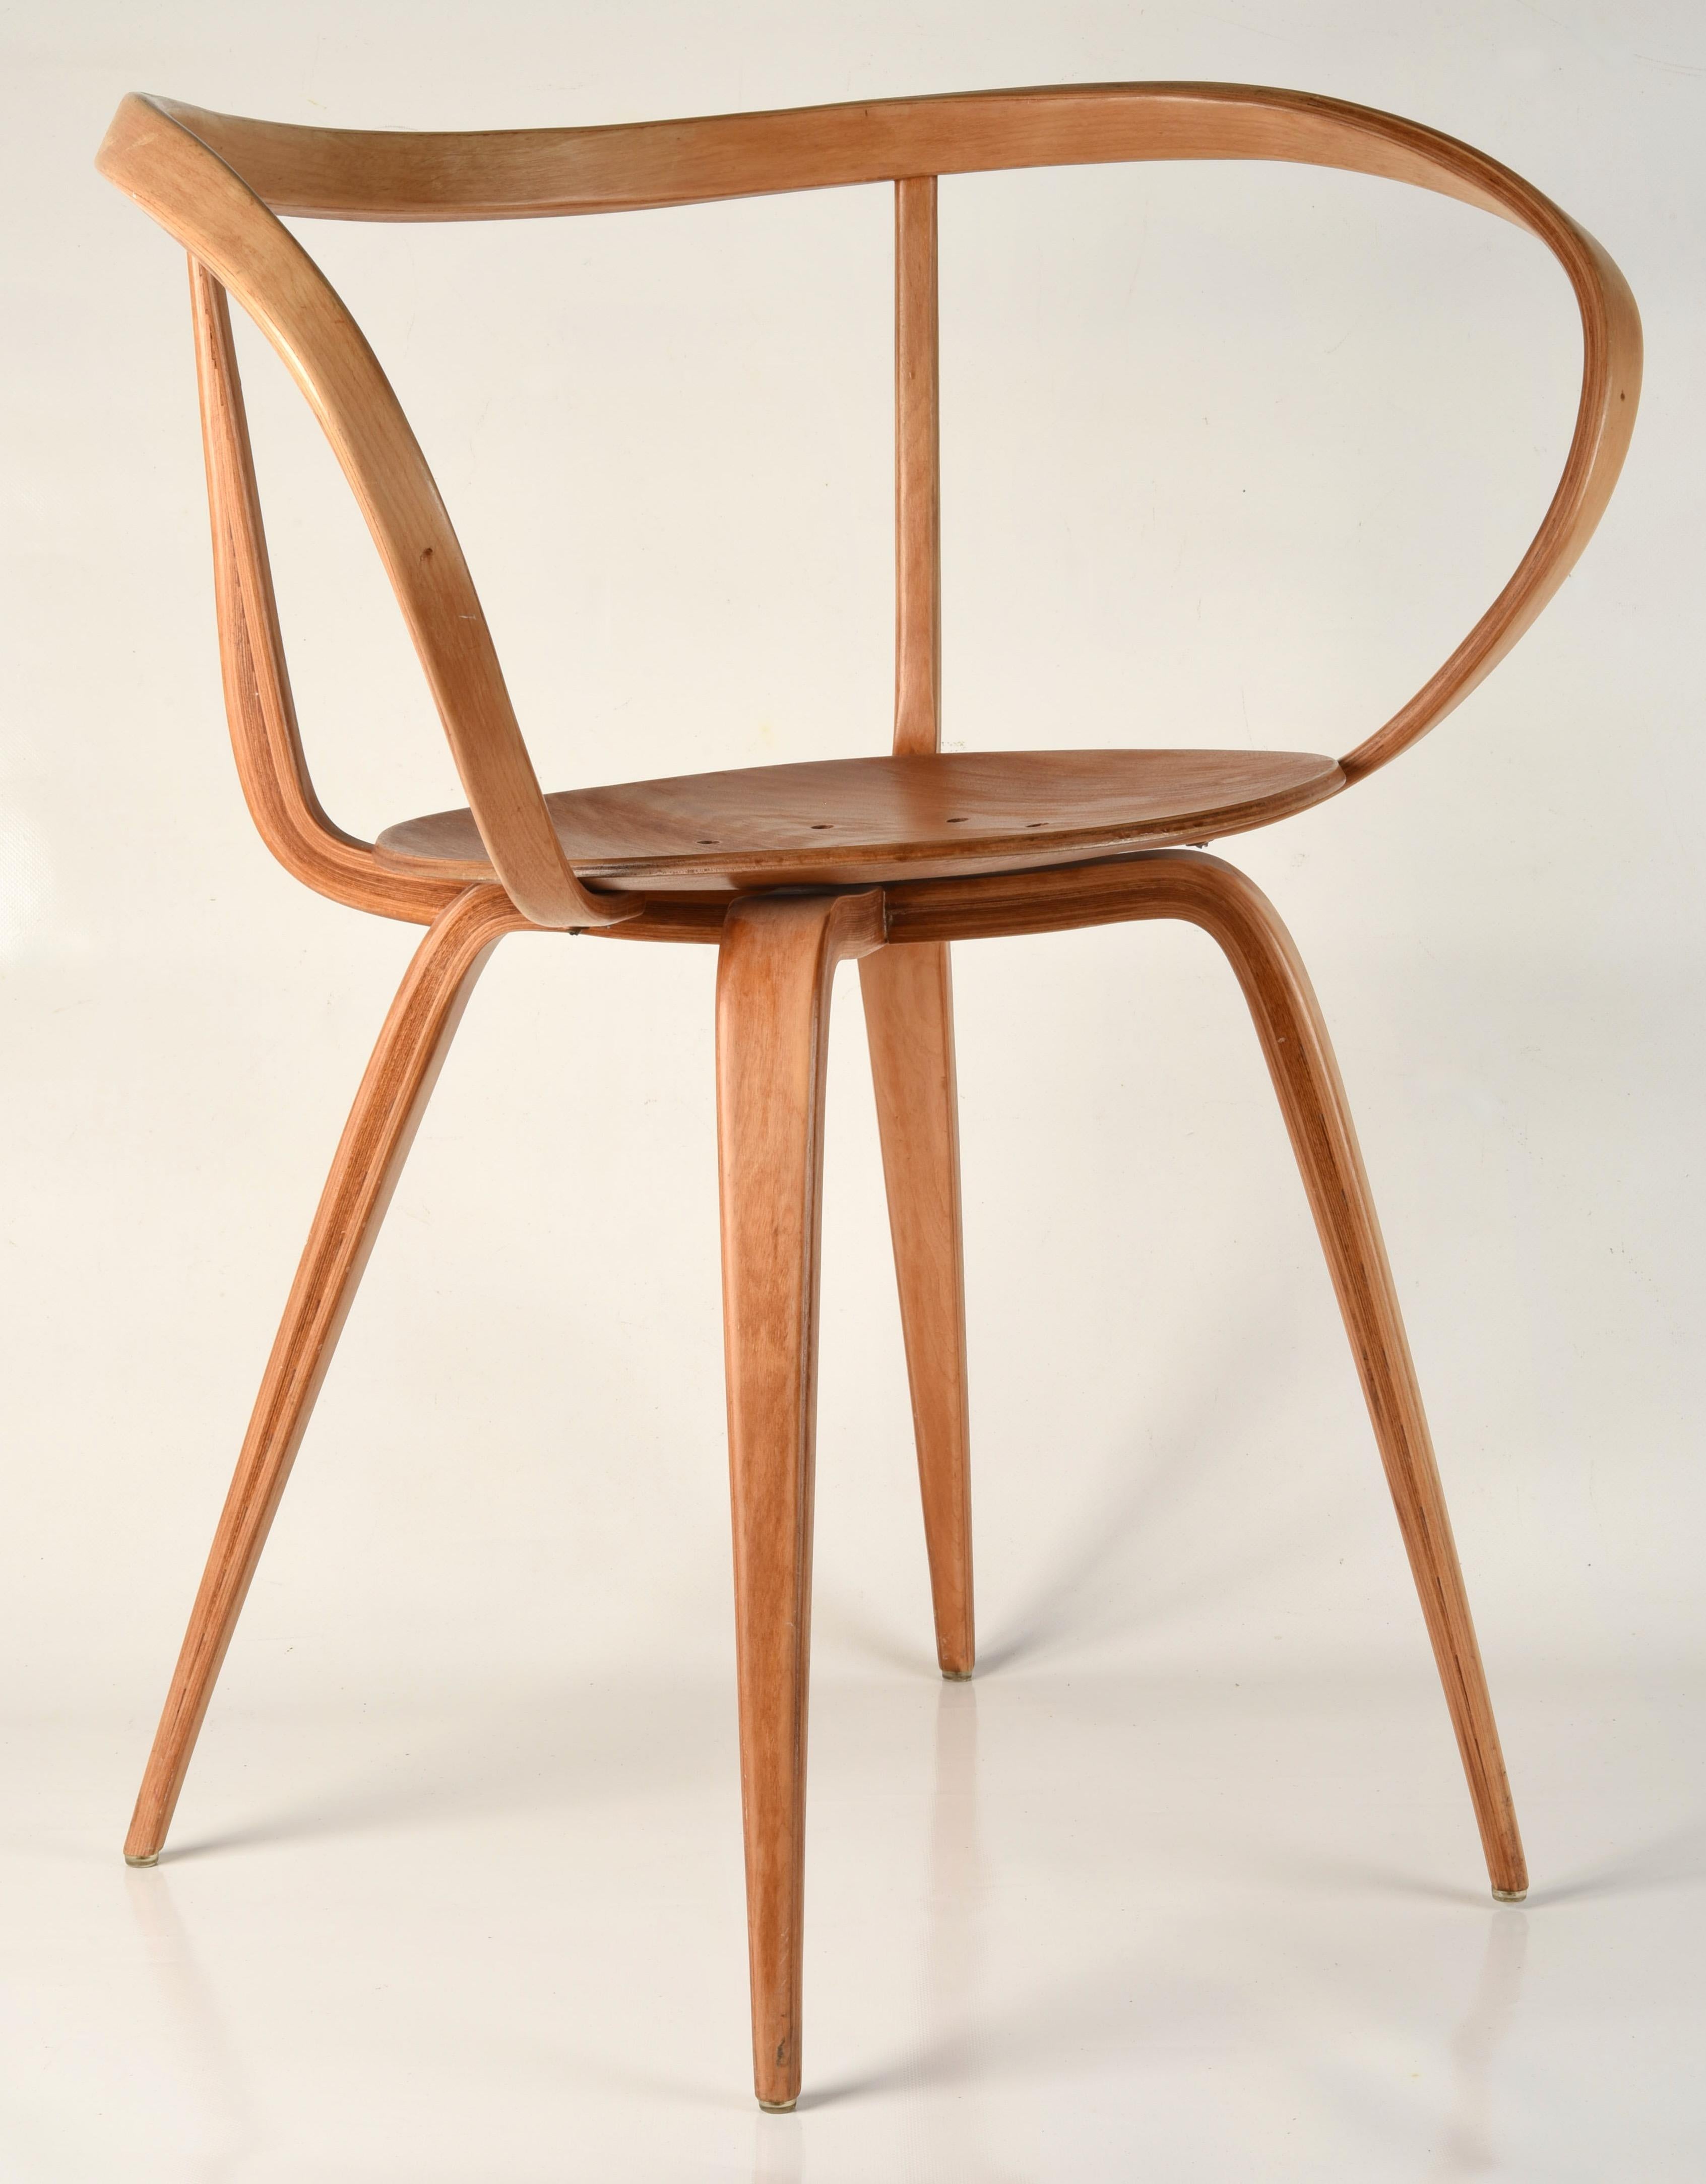 Mid-20th Century Original Early George Nelson for Herman Miller Pretzel Chair  For Sale